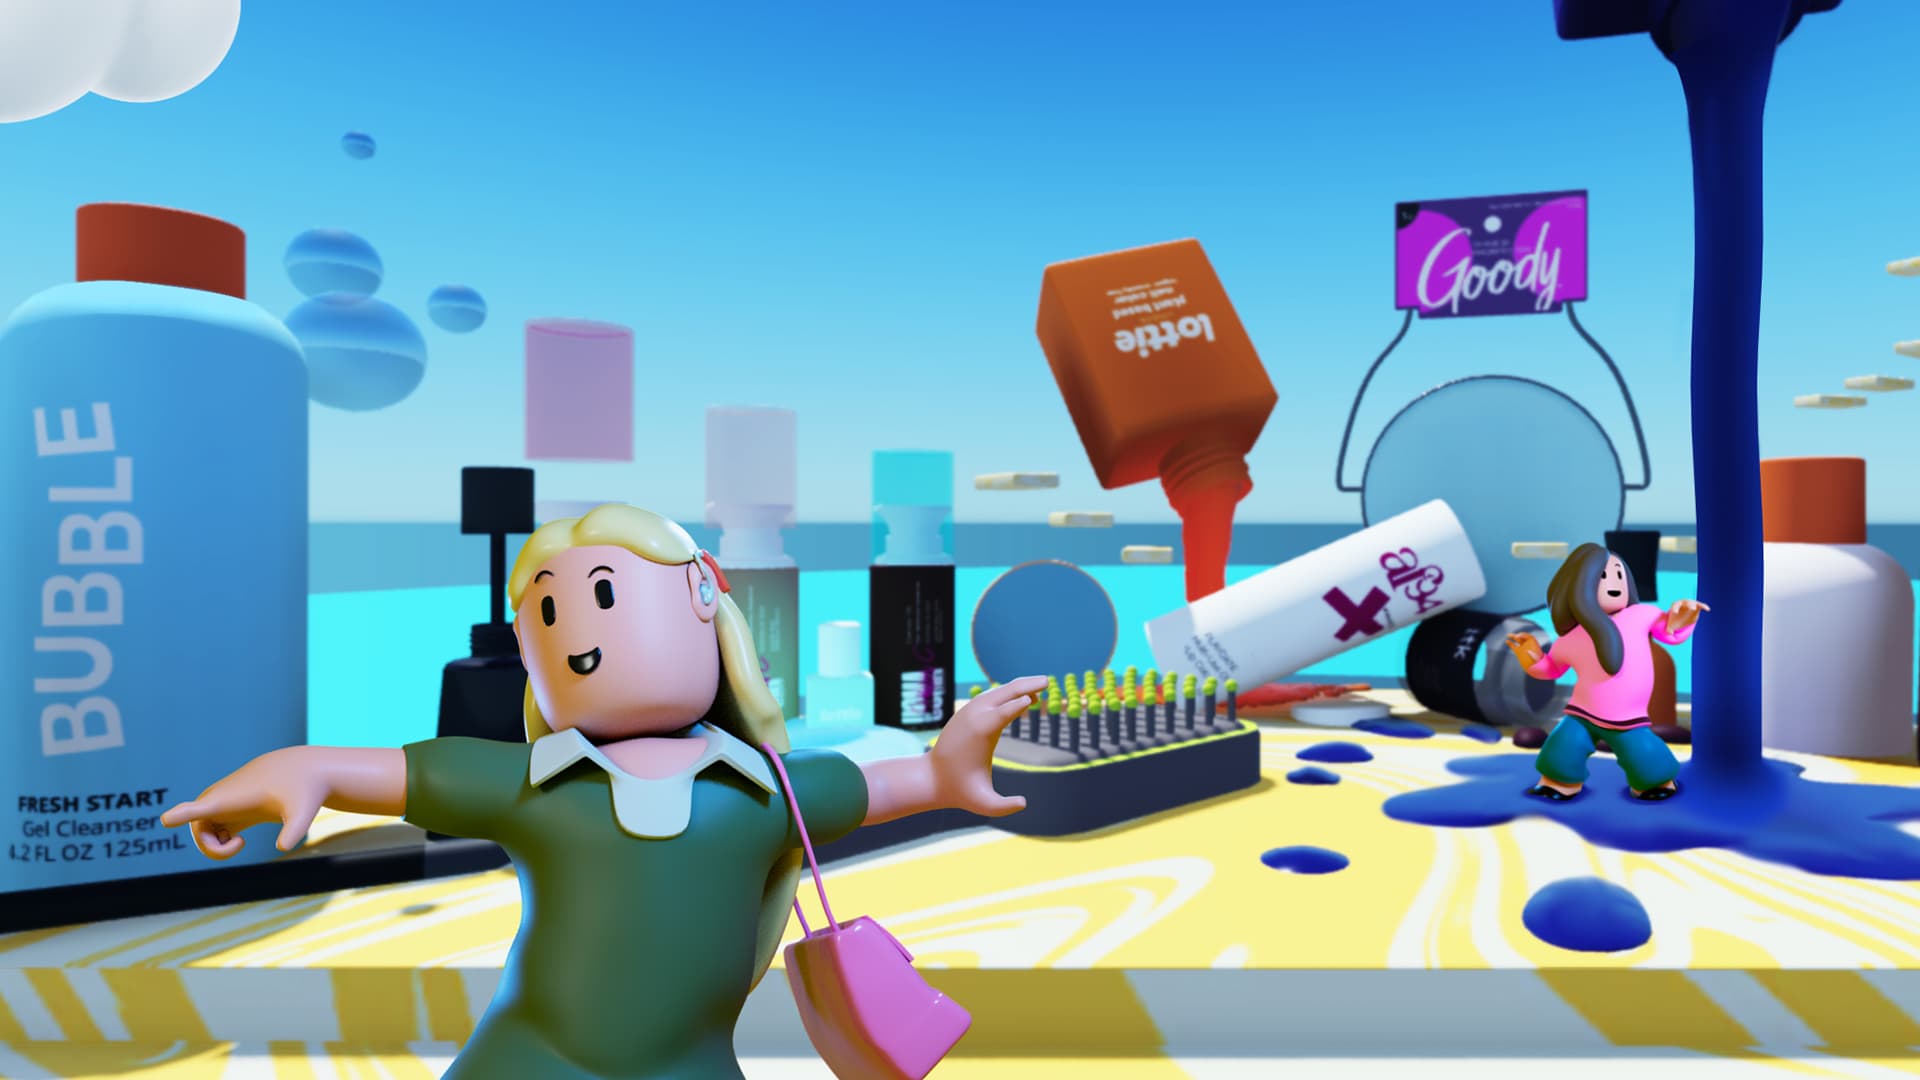 Walmart enters the metaverse with Roblox experiences aimed at younger shoppers – CNBC